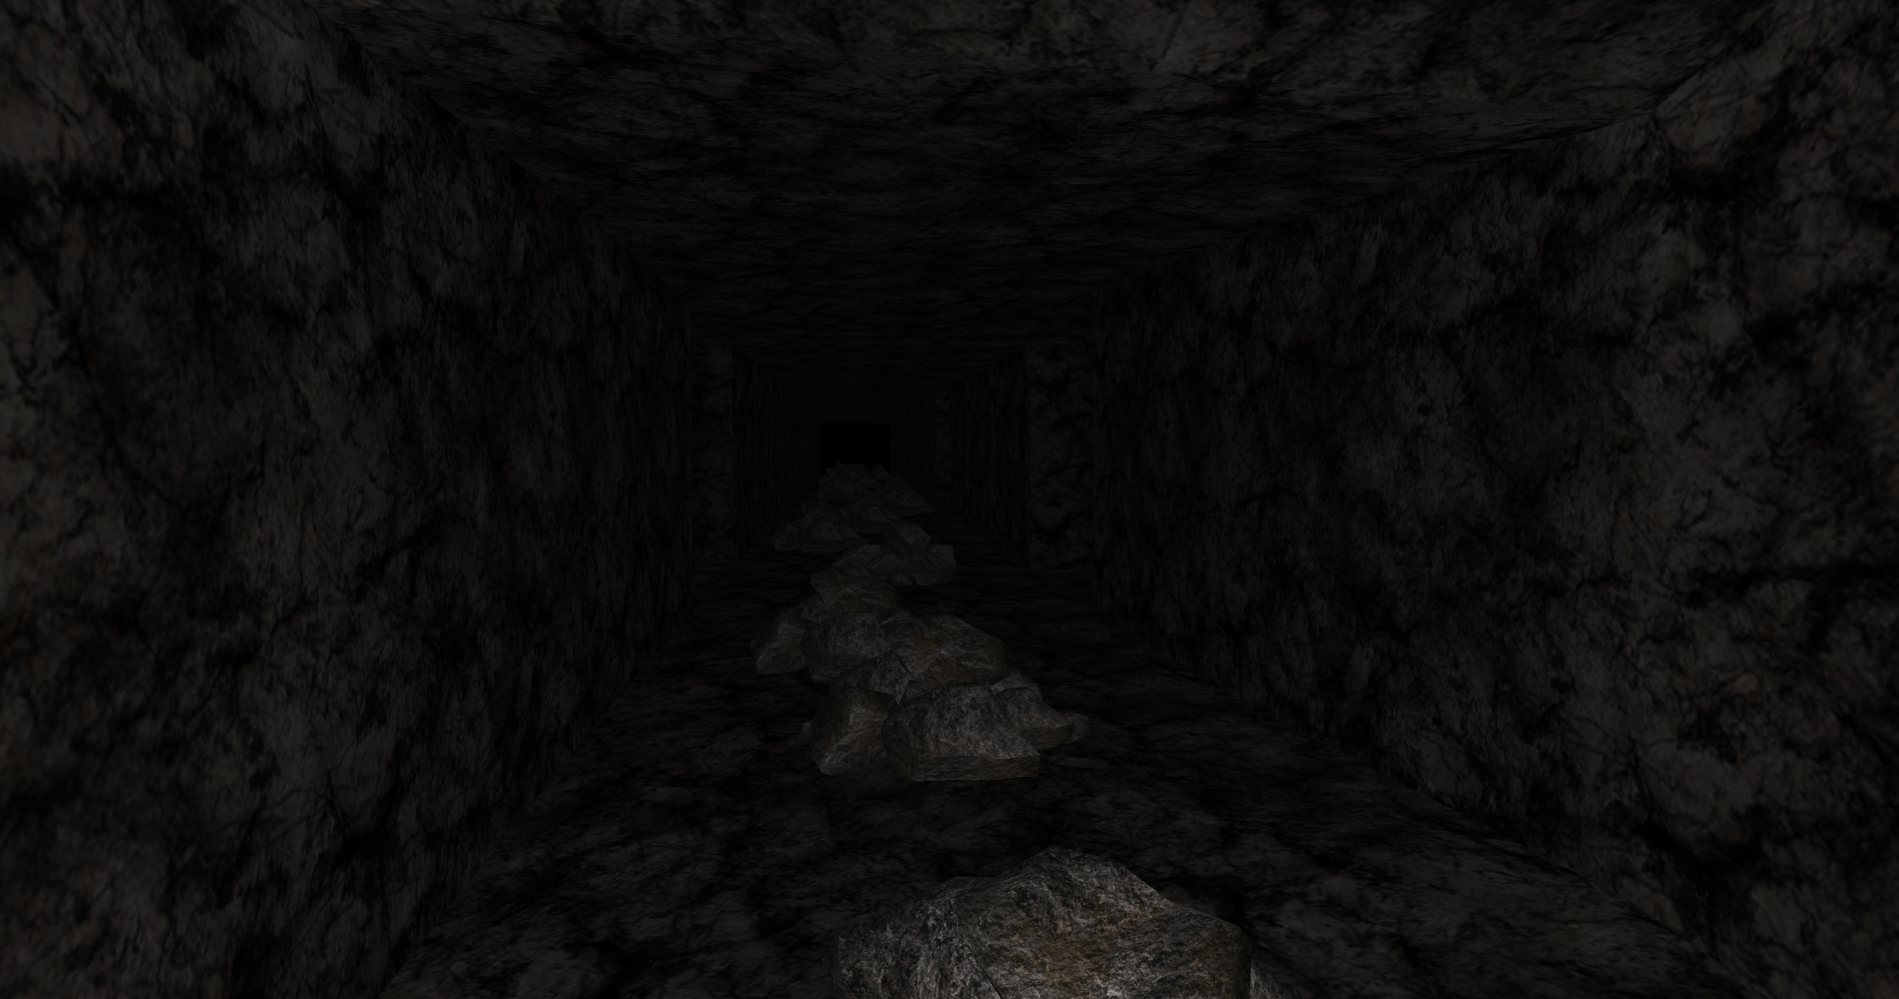 tunnel1.png